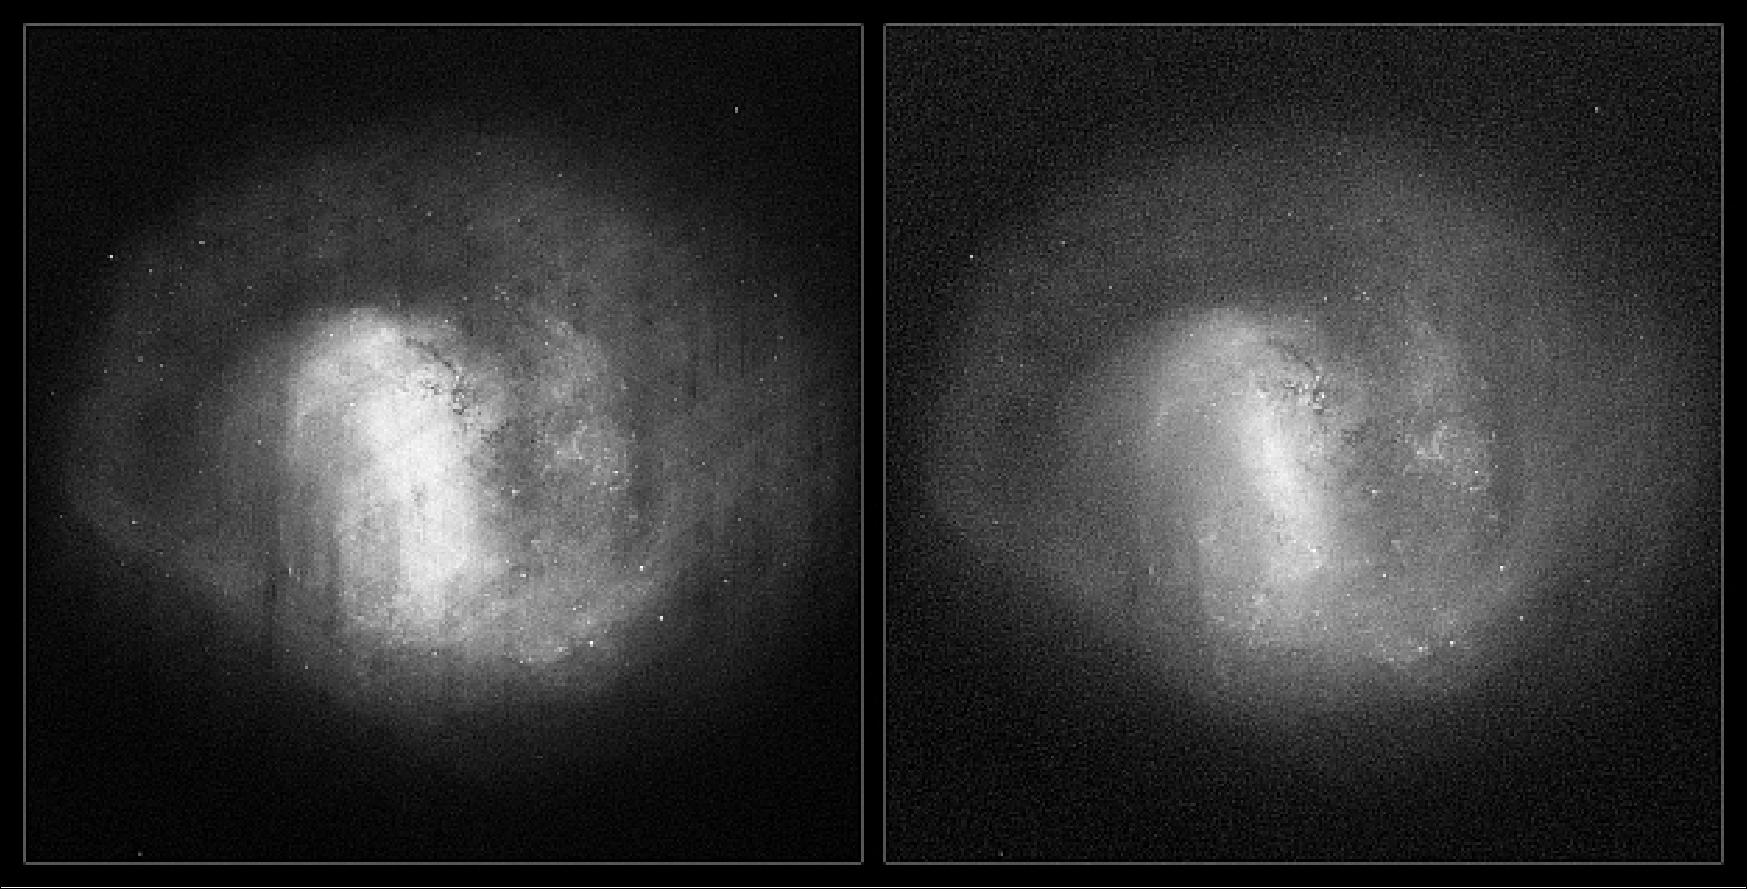 Figure 57: LMC, one of the nearest galaxies to our Milky Way, as viewed by ESA's Gaia satellite after its first 14 months of operations. These views are not photographs but were compiled by mapping the total density of stars (left) and the total amount of radiation, or flux (right), detected by Gaia in each pixel (image credit: ESA/Gaia/DPAC)